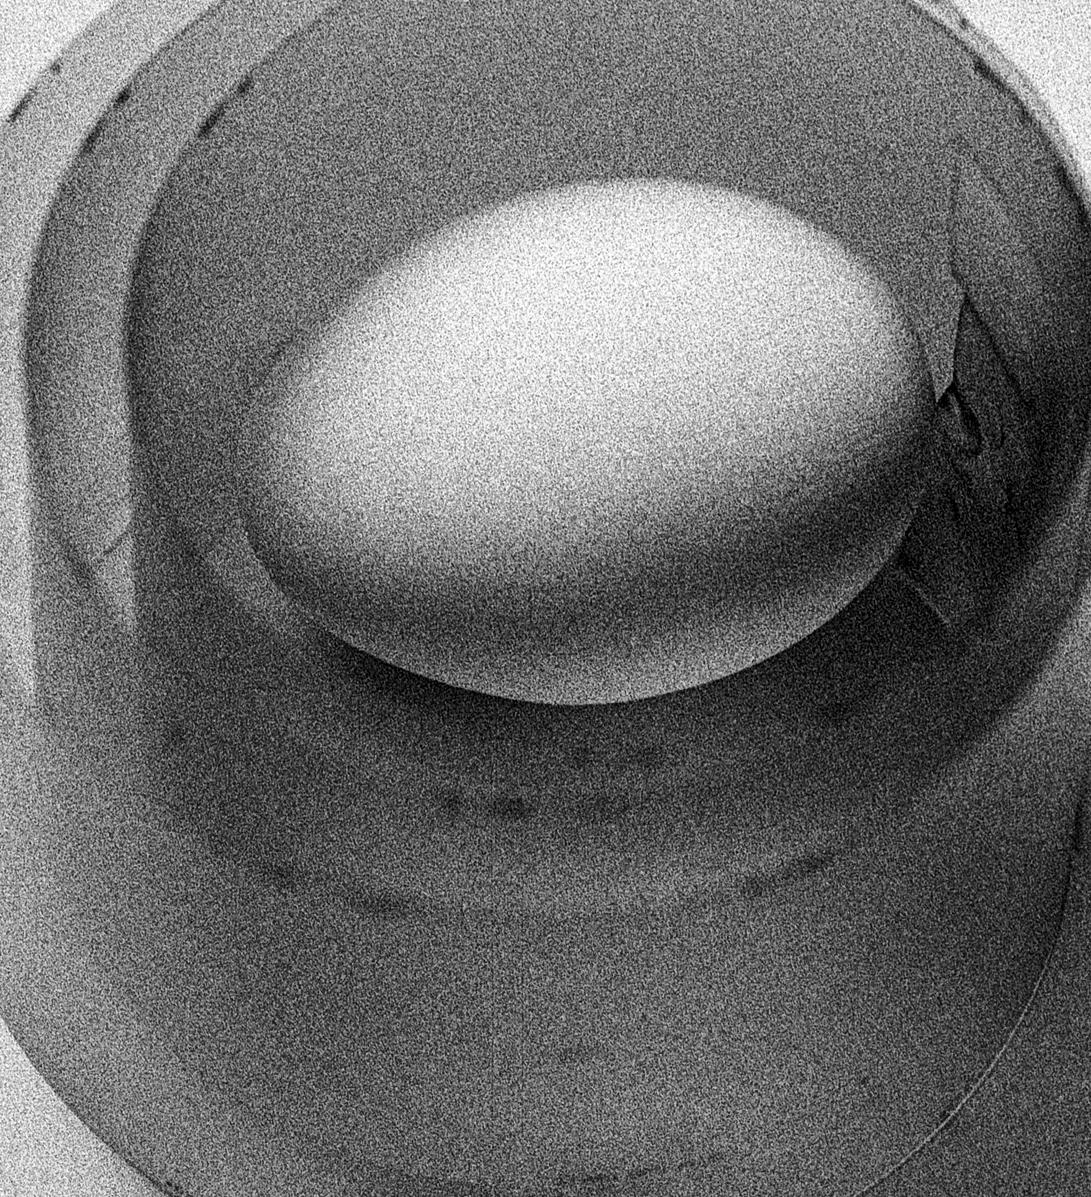 Egg Study 6. Still Life . Black and White Silver Gelatin Print - Photograph by Shine Huang